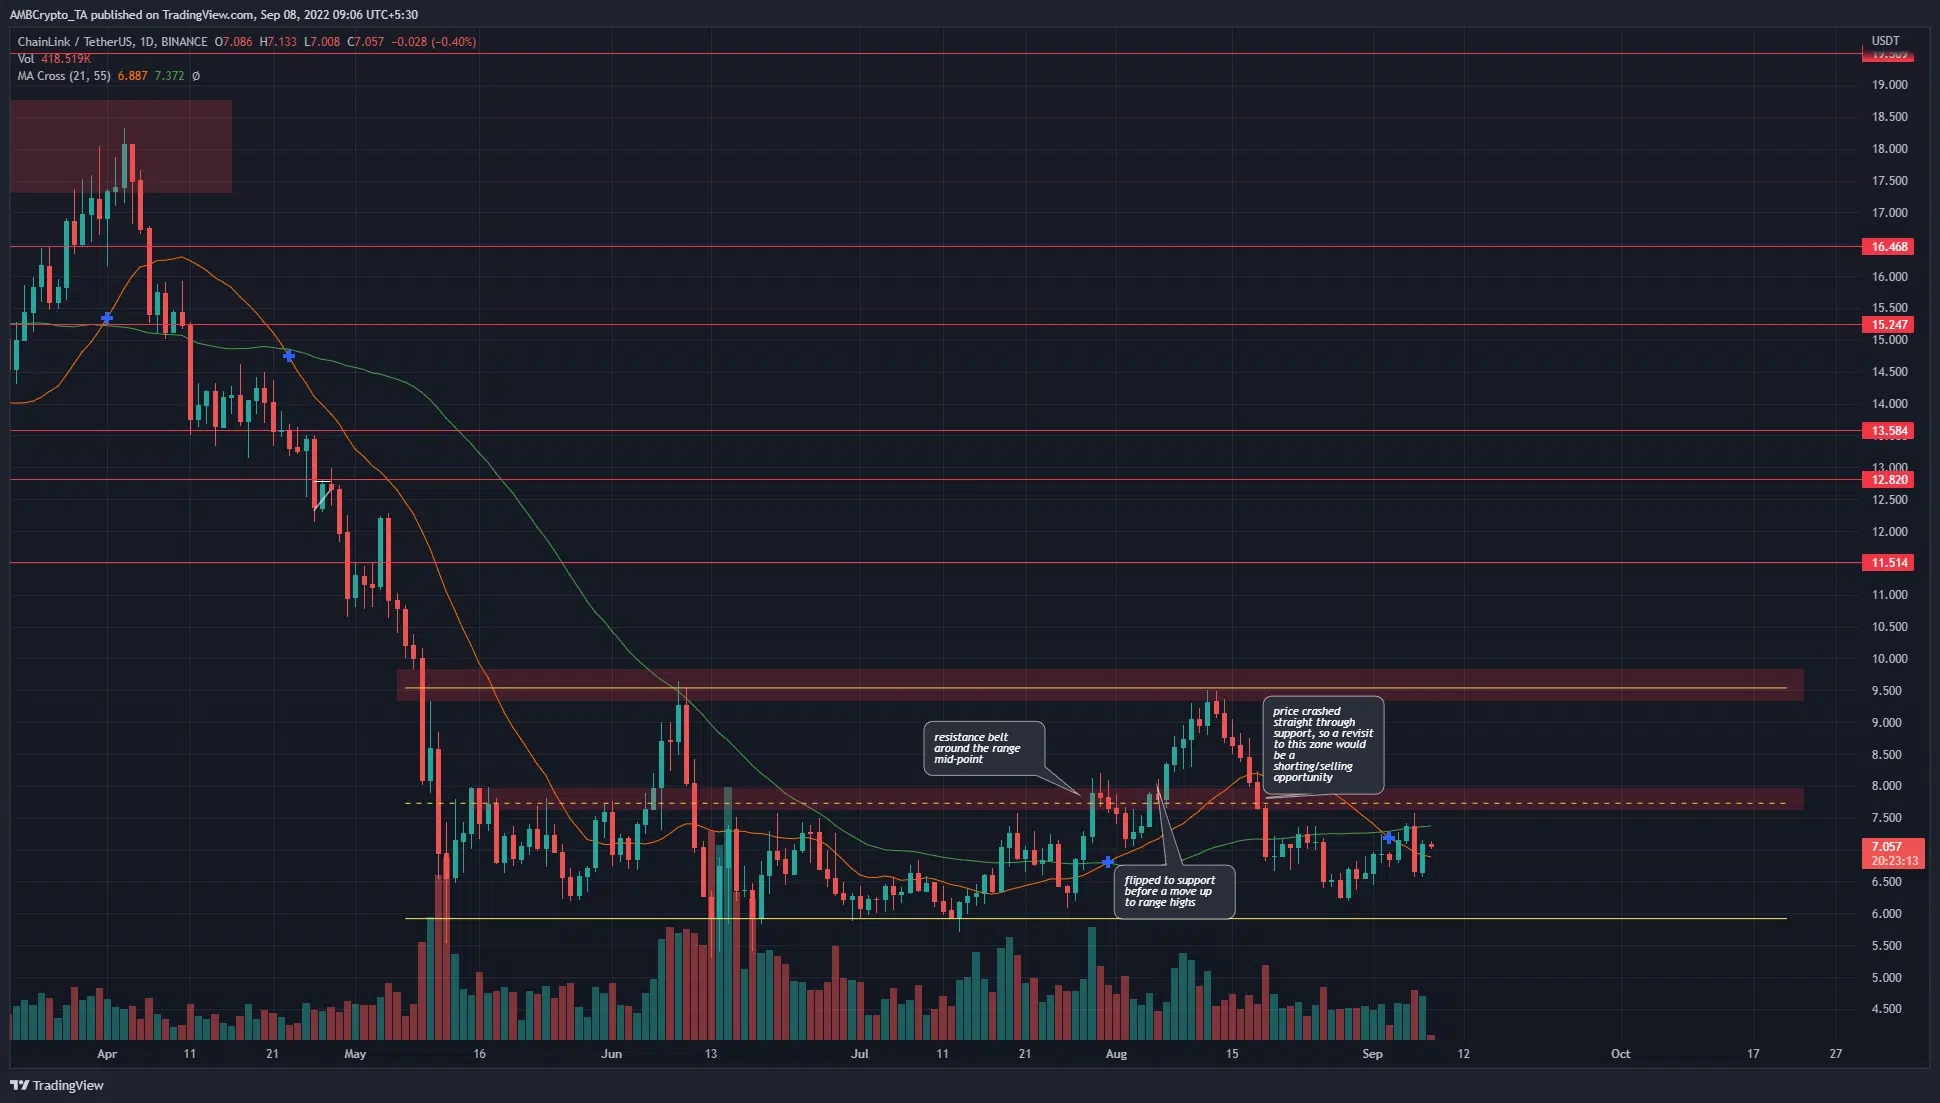 Watch out for a retest of this resistance for Chainlink to prepare for the next major price move